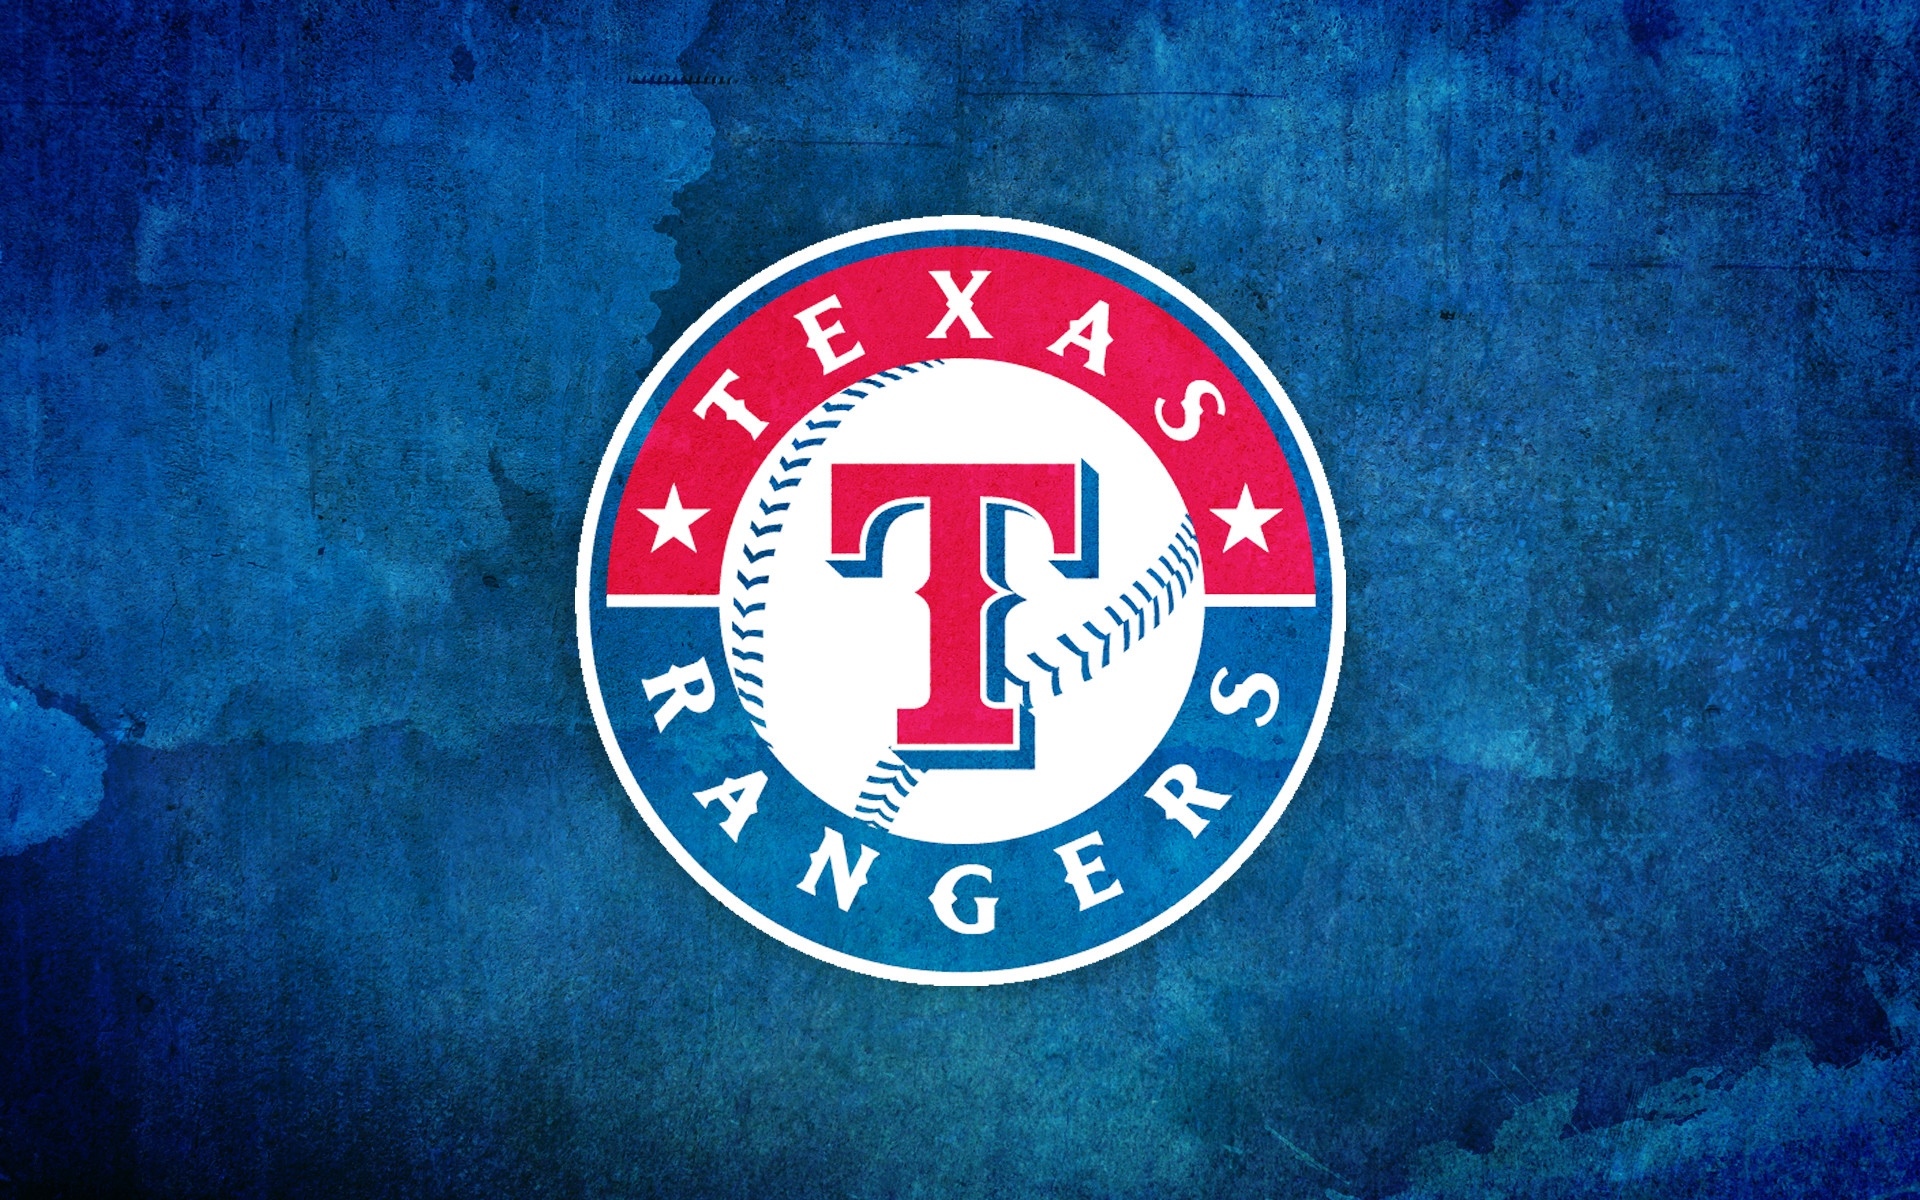 1920x1200 Texas Rangers Wallpapers and Screensavers